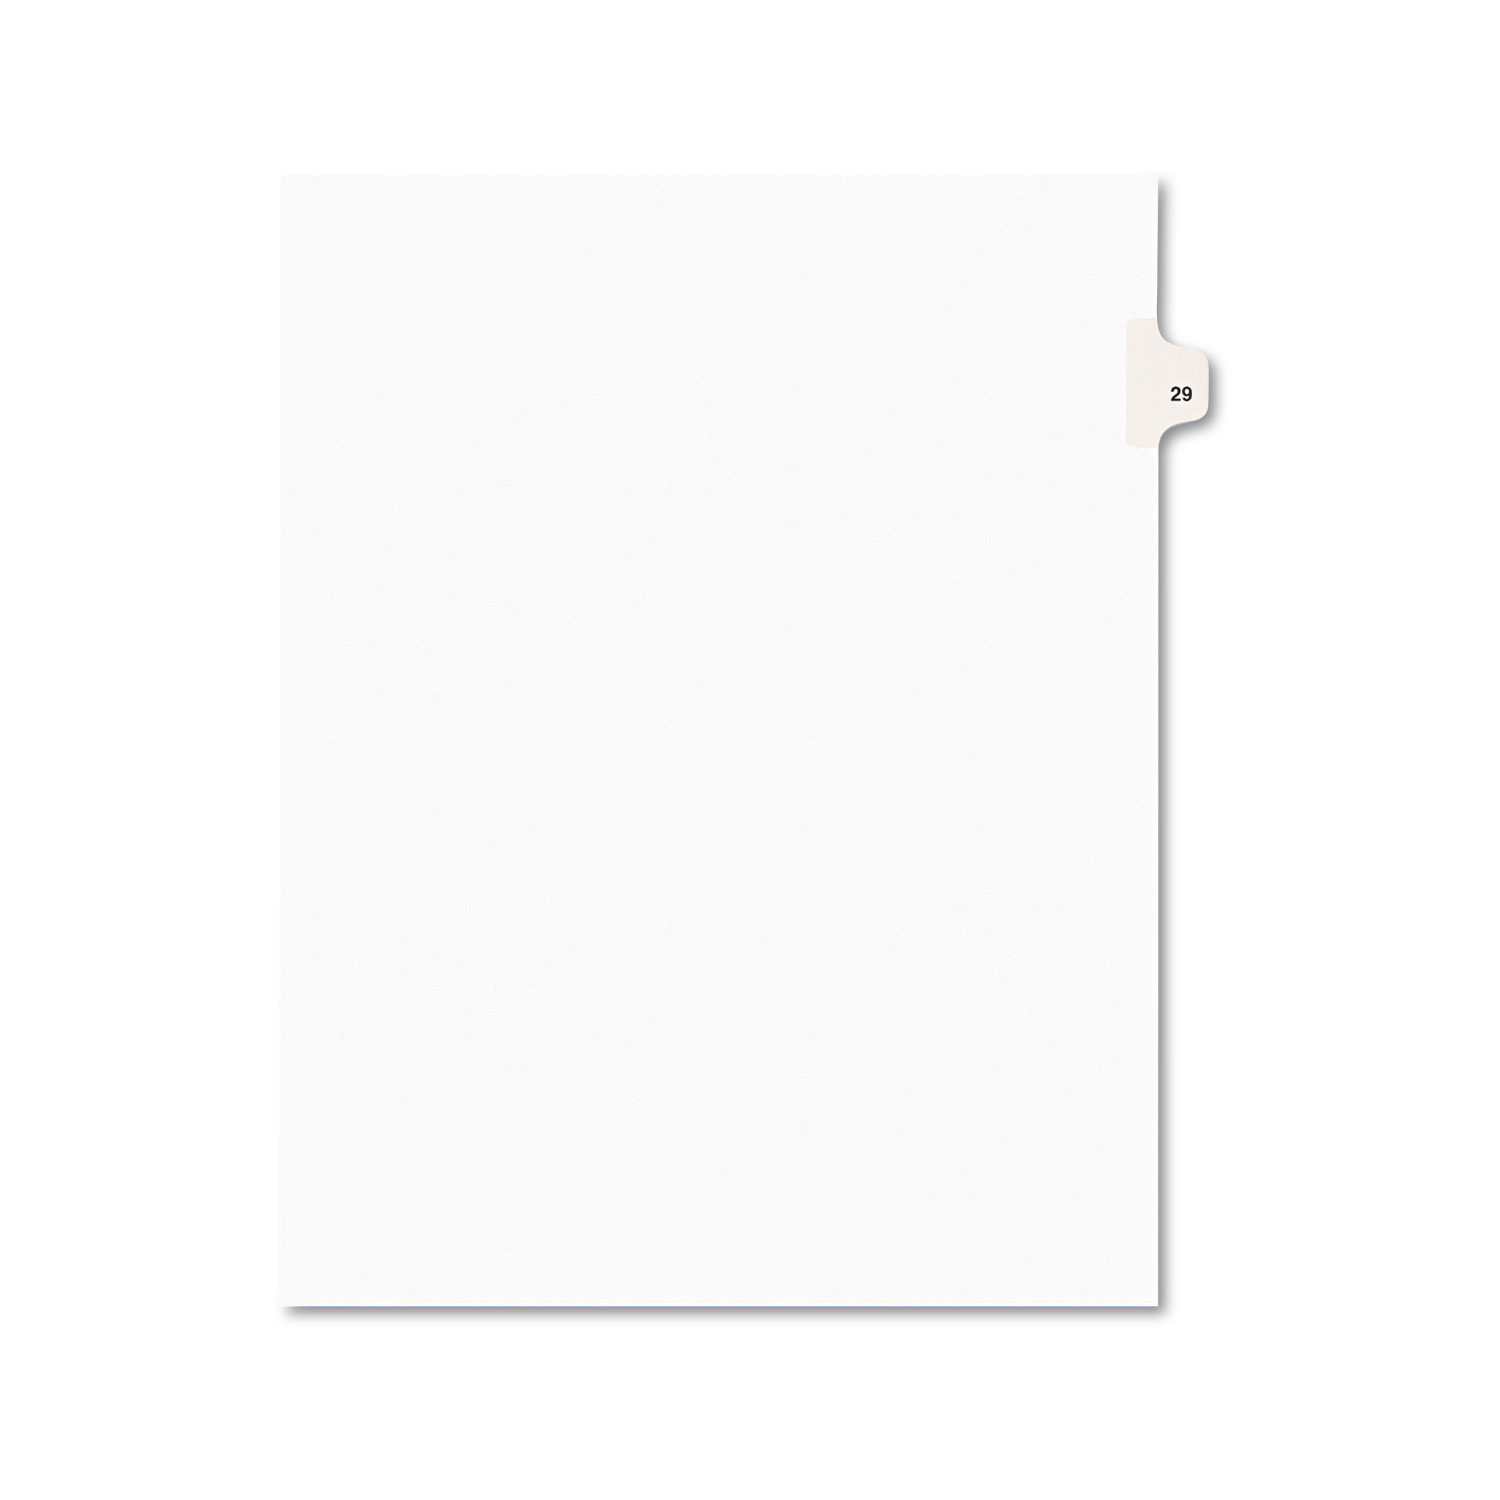  Avery 01029 Preprinted Legal Exhibit Side Tab Index Dividers, Avery Style, 10-Tab, 29, 11 x 8.5, White, 25/Pack (AVE01029) 